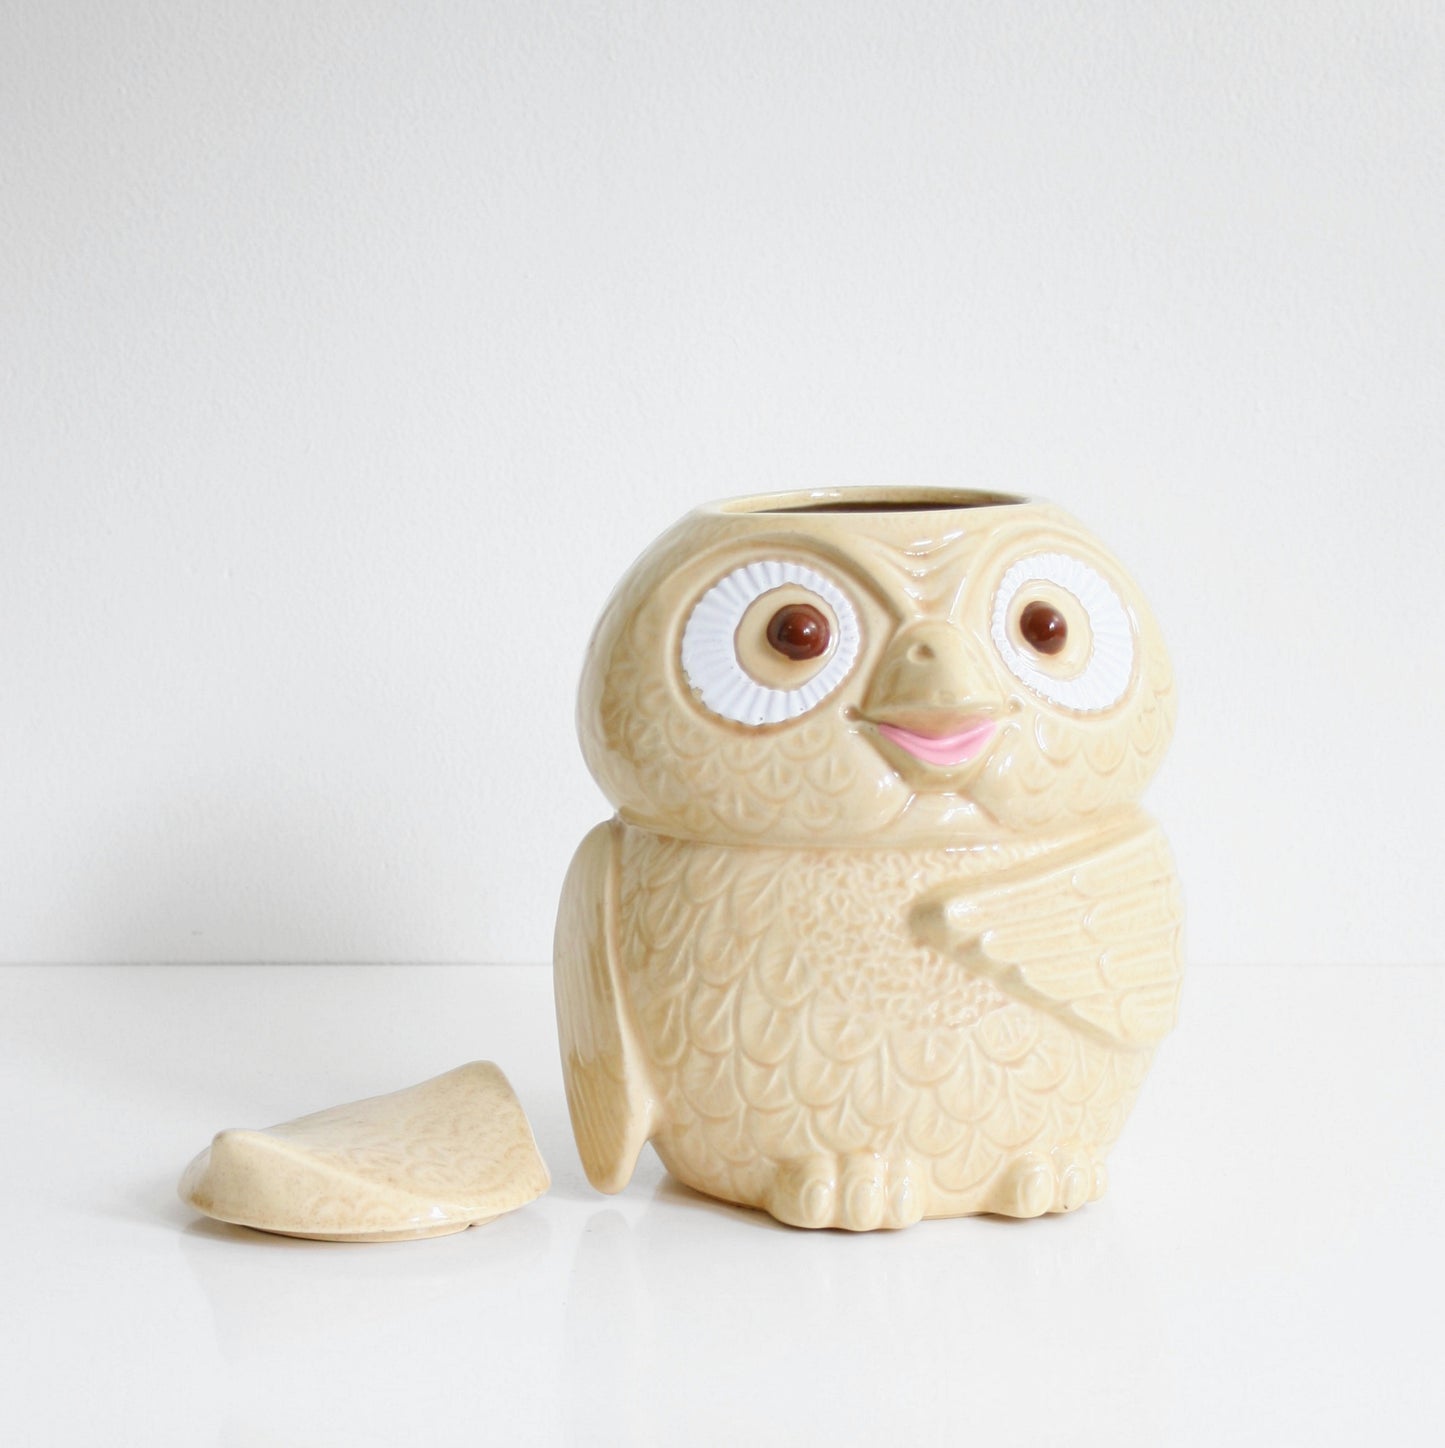 SOLD - Vintage McCoy Woodsy Owl Cookie Jar / Mid Century McCoy Owl Canister in Cream and Pink